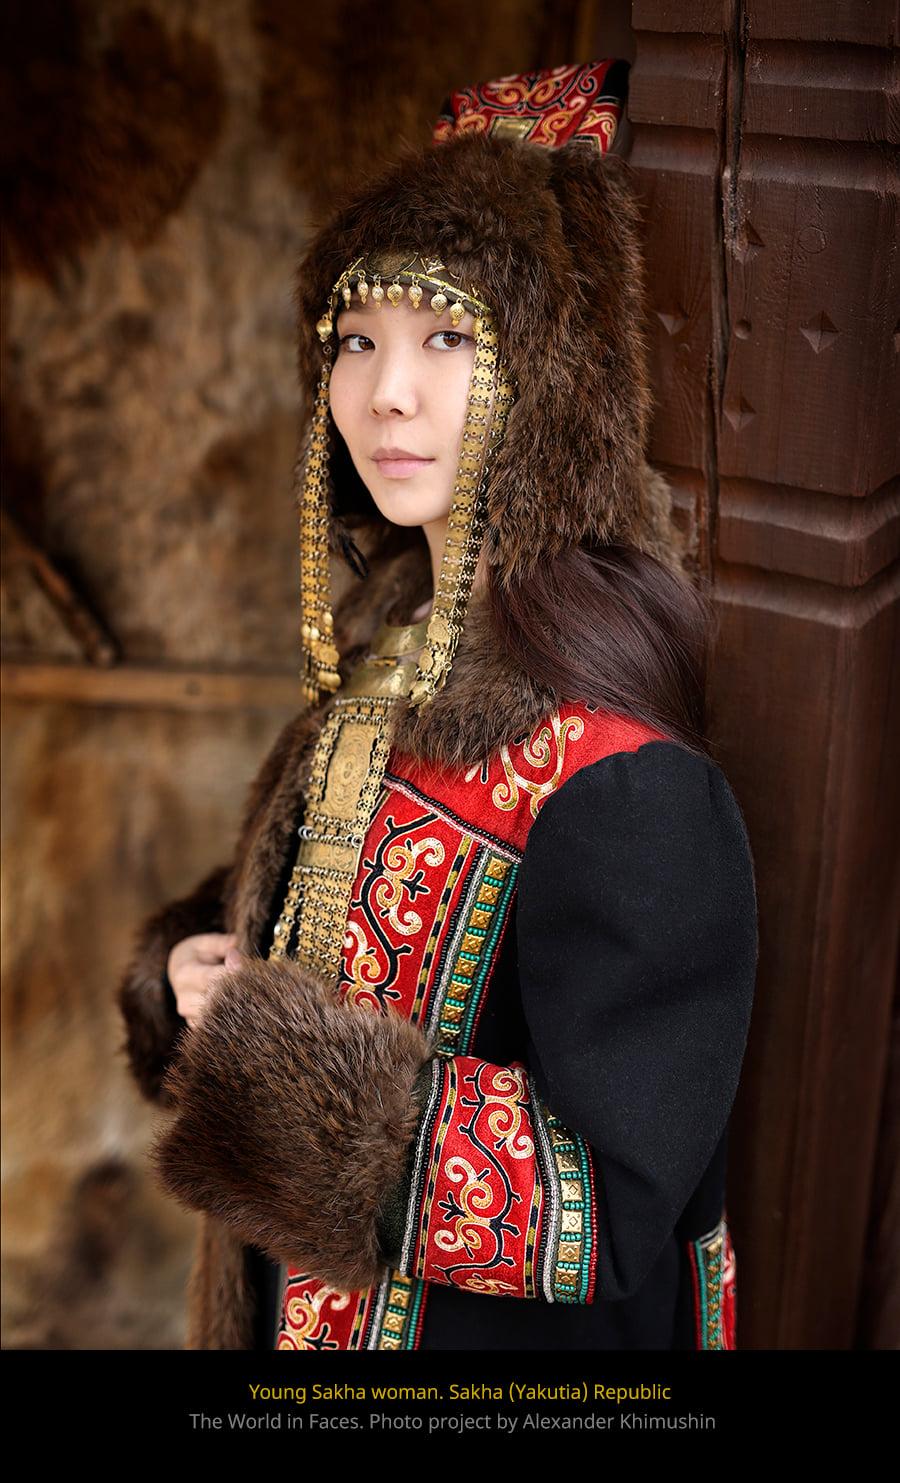 A young Sakha woman in traditional jewelry and clothing in the coldest region of the world: Sakha (Yakutia), where the photographer grew up (© <a href="https://www.facebook.com/xperimenter">Alexander Khimushin</a> / The World In Faces)